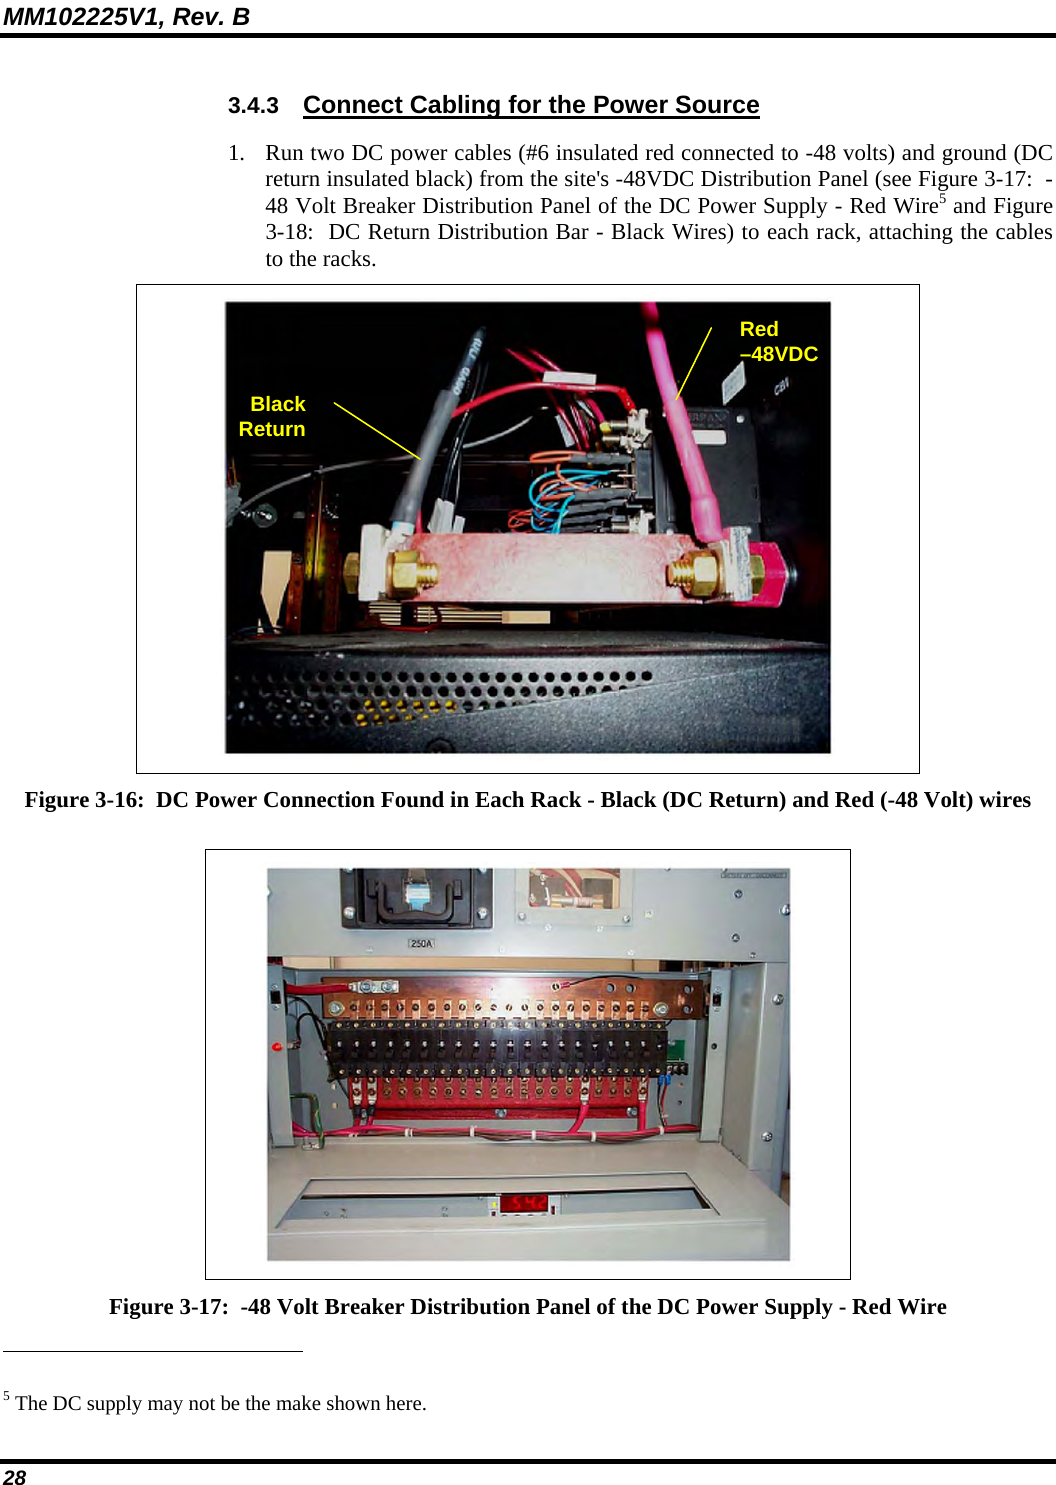 MM102225V1, Rev. B 28 3.4.3  Connect Cabling for the Power Source 1. Run two DC power cables (#6 insulated red connected to -48 volts) and ground (DC return insulated black) from the site&apos;s -48VDC Distribution Panel (see Figure 3-17:  -48 Volt Breaker Distribution Panel of the DC Power Supply - Red Wire5 and Figure 3-18:  DC Return Distribution Bar - Black Wires) to each rack, attaching the cables to the racks.  Figure 3-16:  DC Power Connection Found in Each Rack - Black (DC Return) and Red (-48 Volt) wires   Figure 3-17:  -48 Volt Breaker Distribution Panel of the DC Power Supply - Red Wire                                                            5 The DC supply may not be the make shown here. Red –48VDC Black Return 